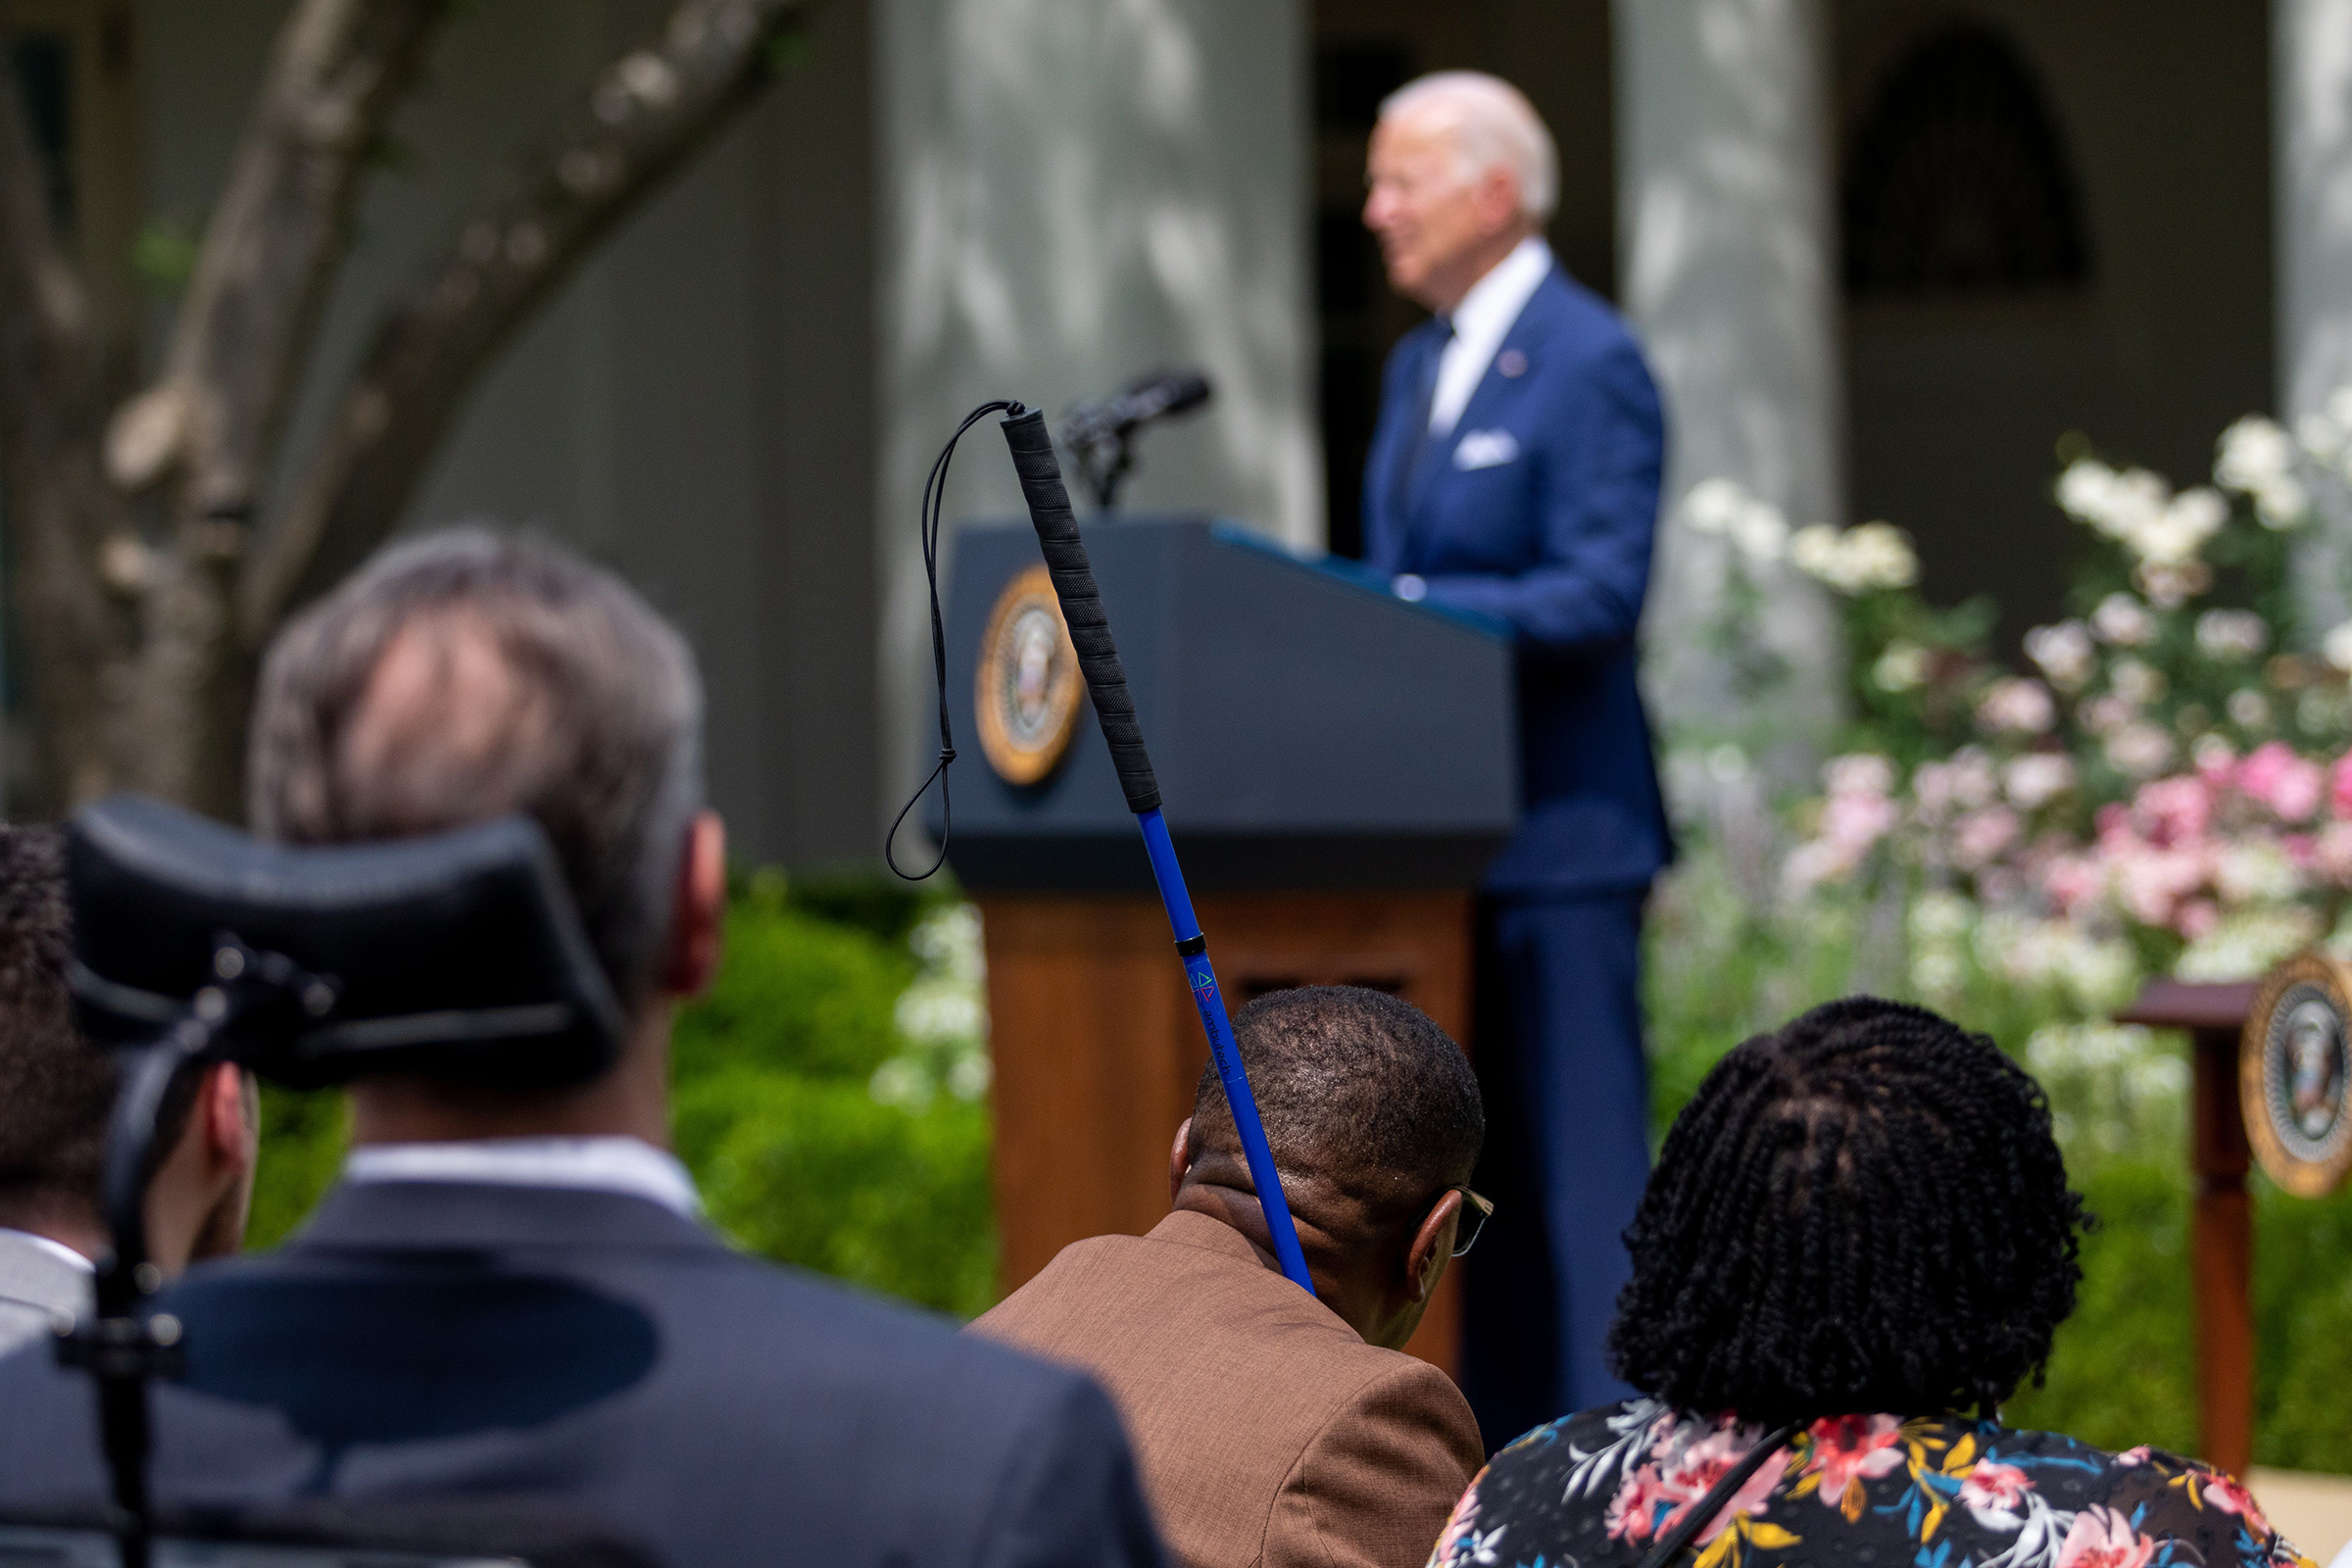 Audience members listen as president Joe Biden speaks during an event marking the 31st anniversary of the Americans with Disabilities Act in the Rose Garden of the White House in Washington, D.C., on July 26, 2021. (Shutterstock)